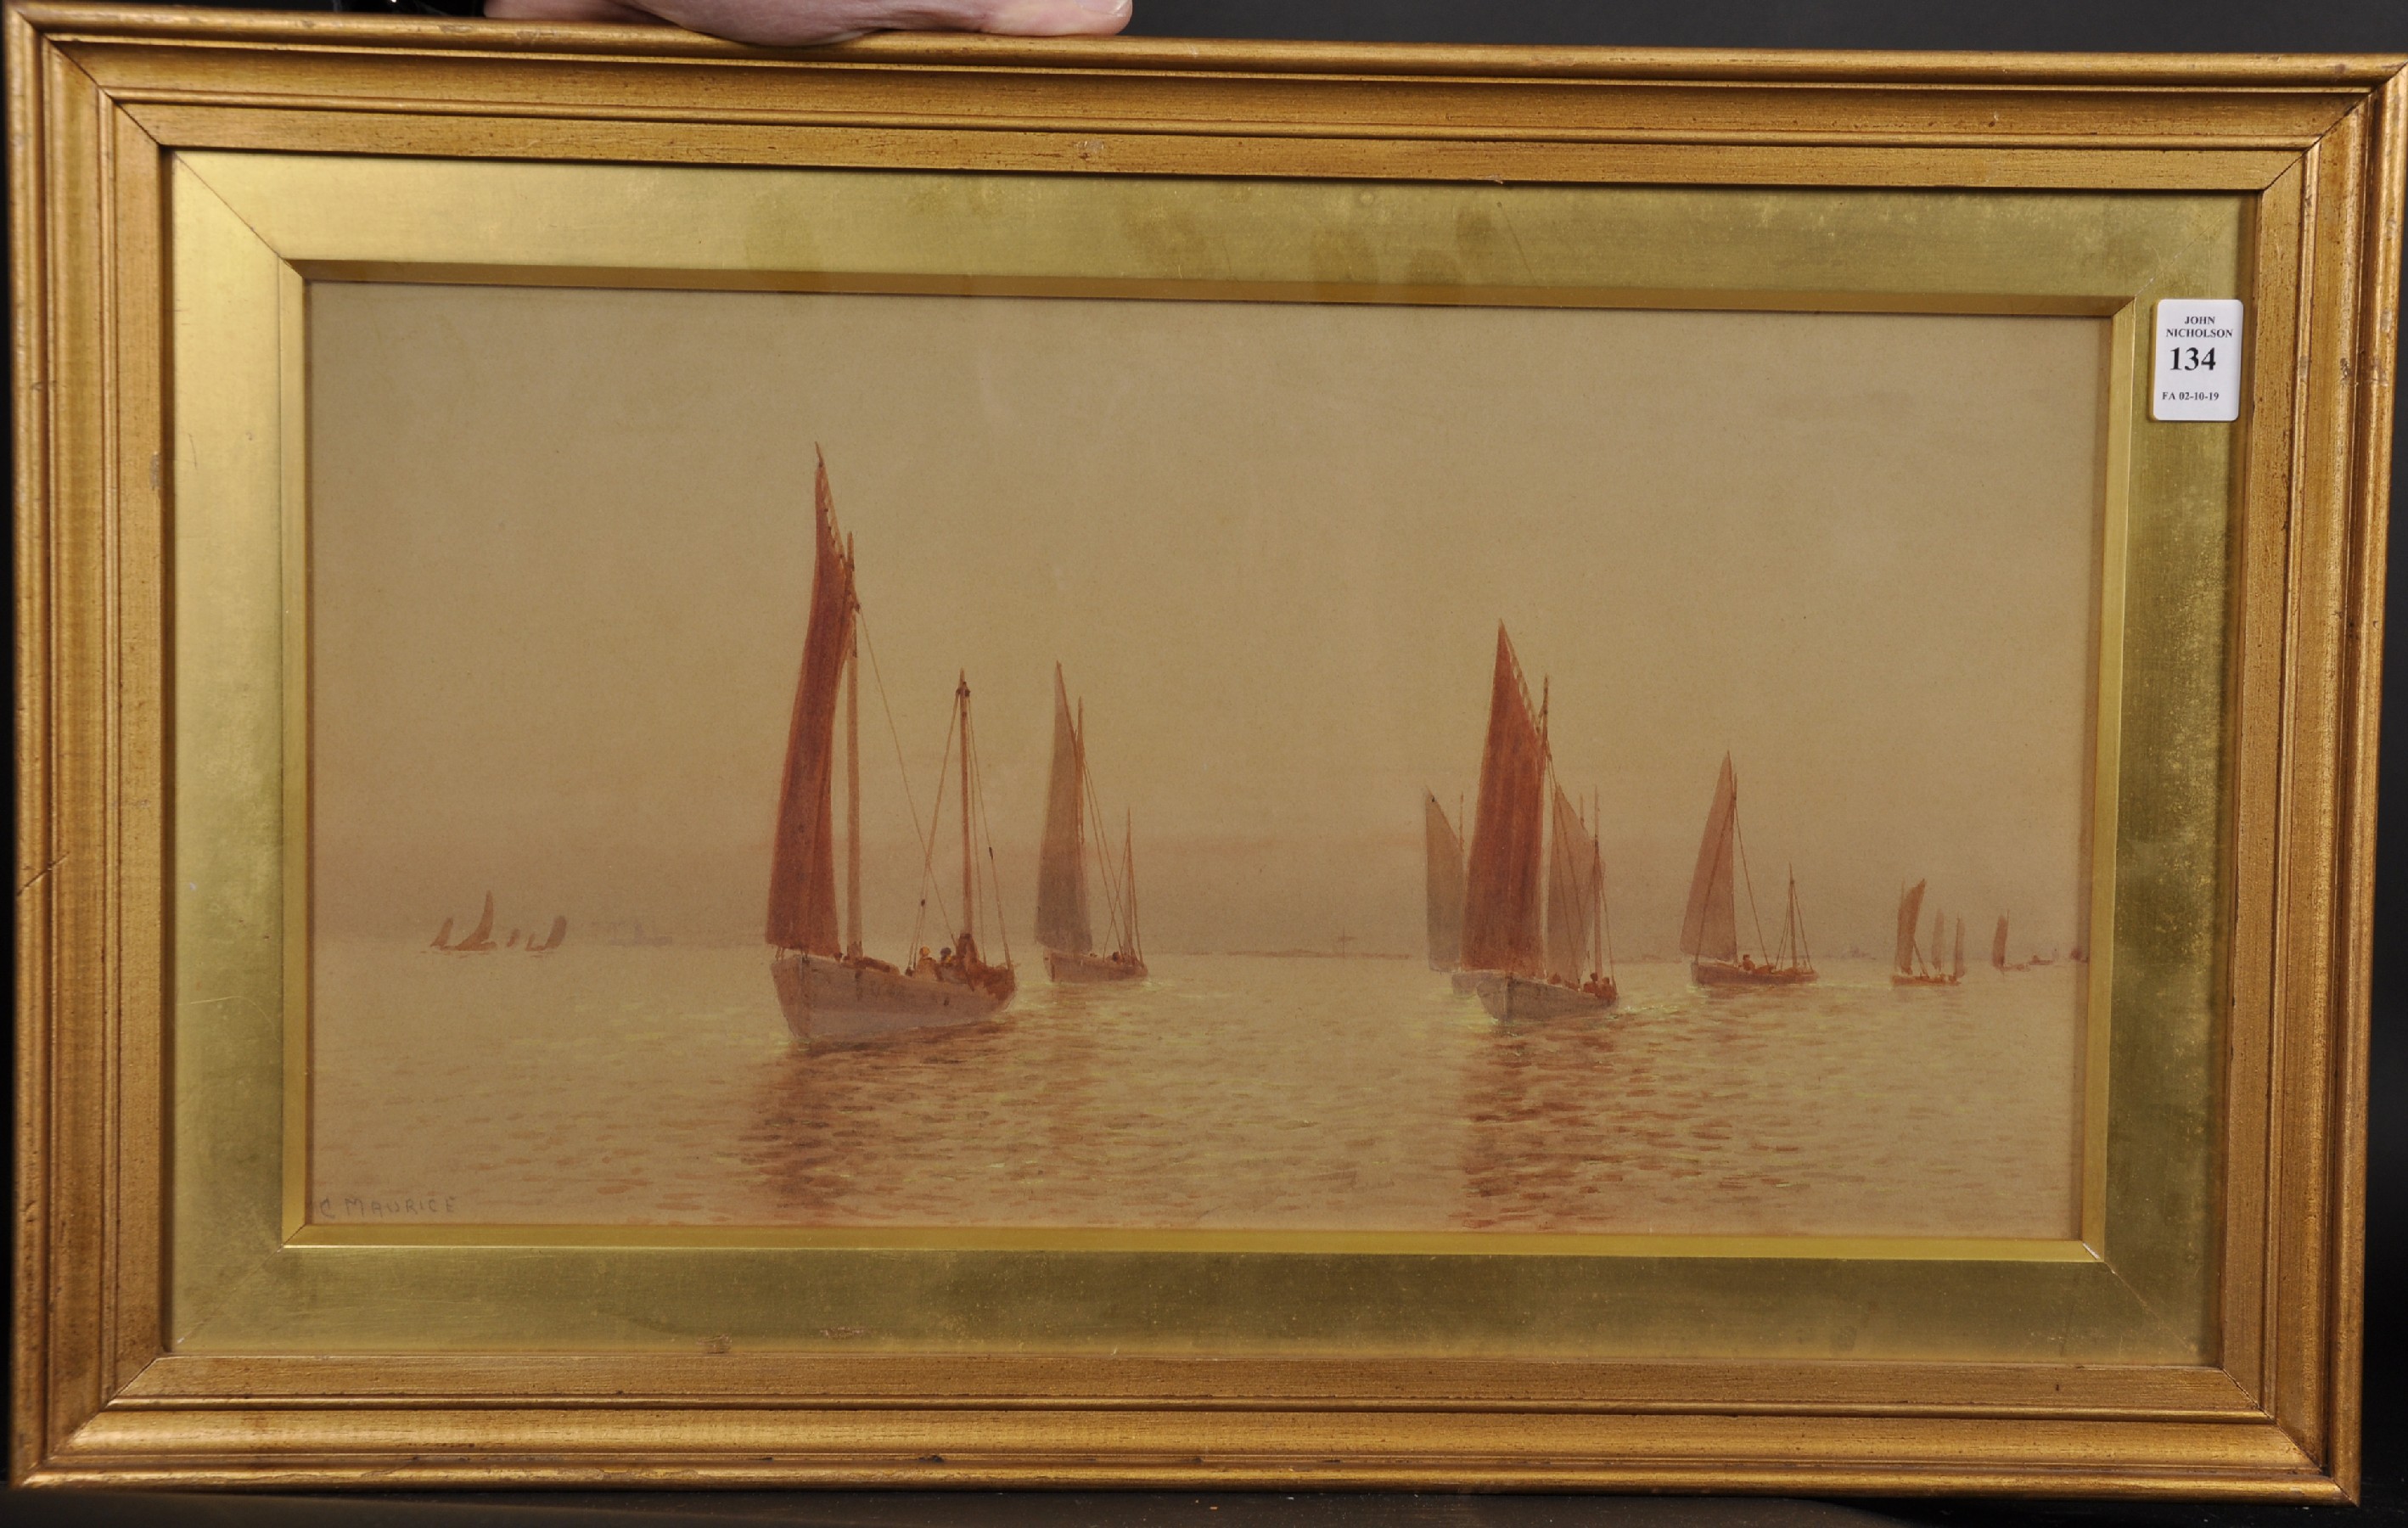 C... Maurice (19th - 20th Century) British. A Shipping Scene, Watercolour, Signed, 10" x 18.5". - Image 2 of 4